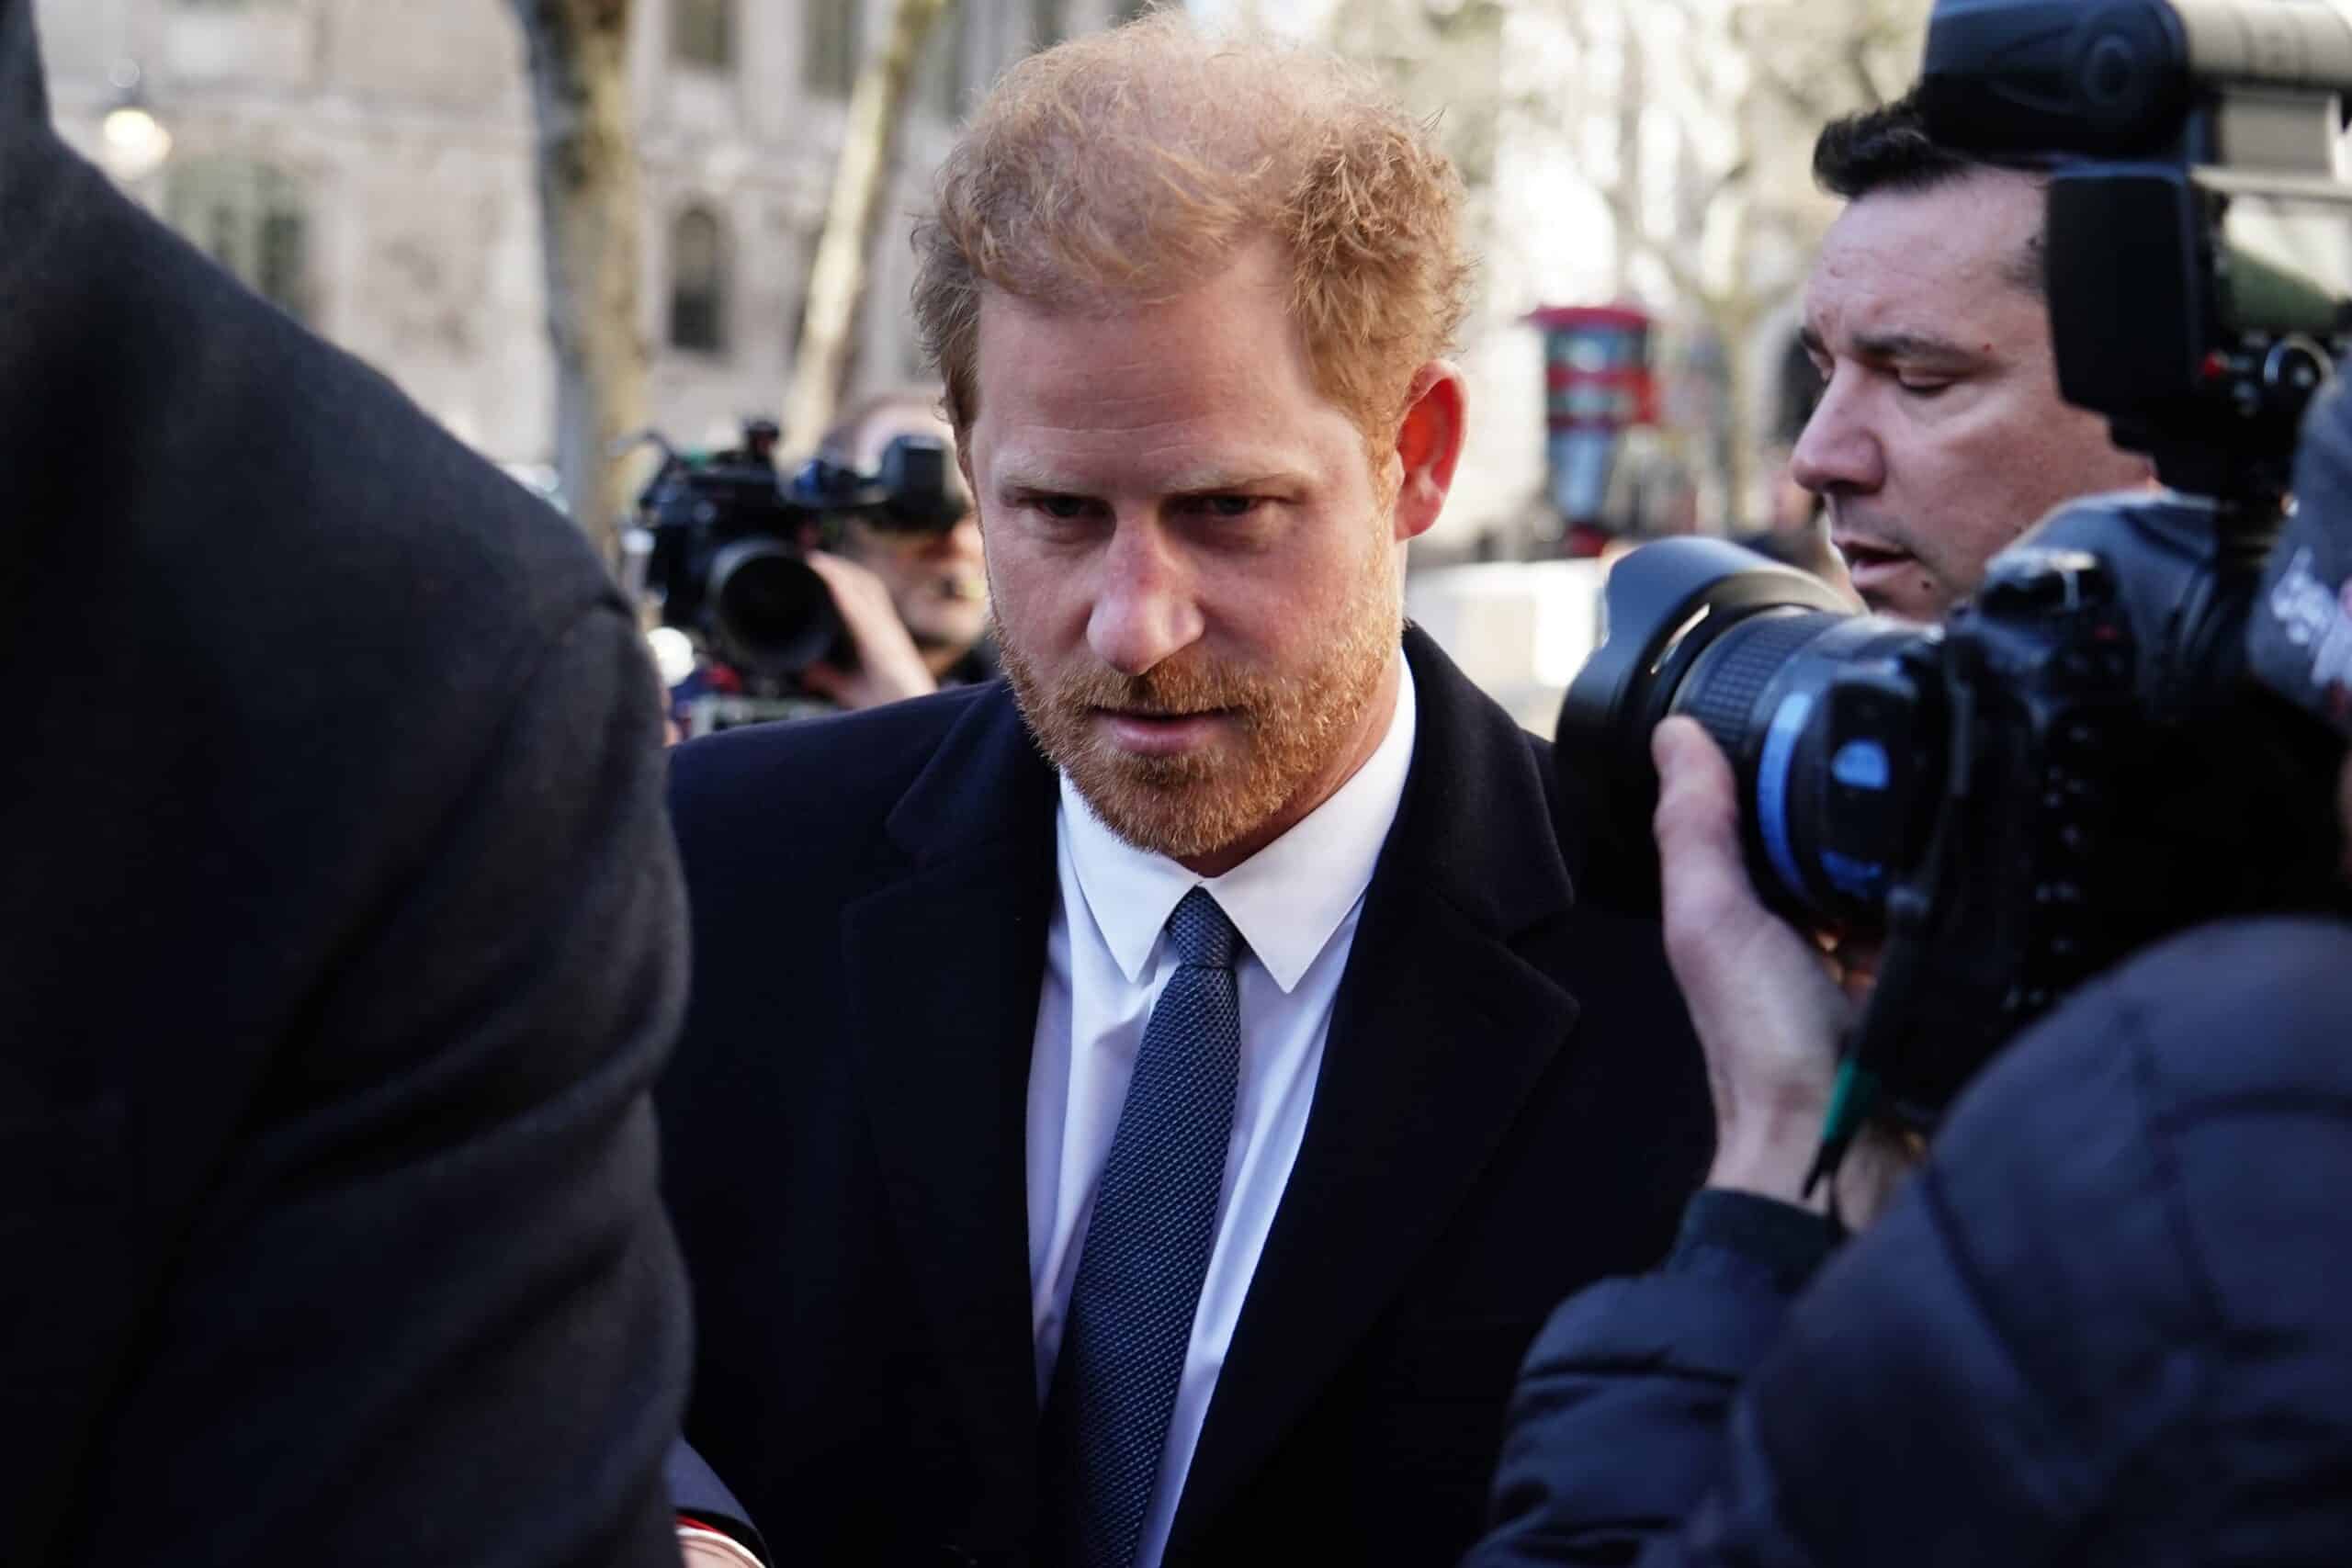 Prince Harry and Meghan Markle involved in ‘near catastrophic car chase’